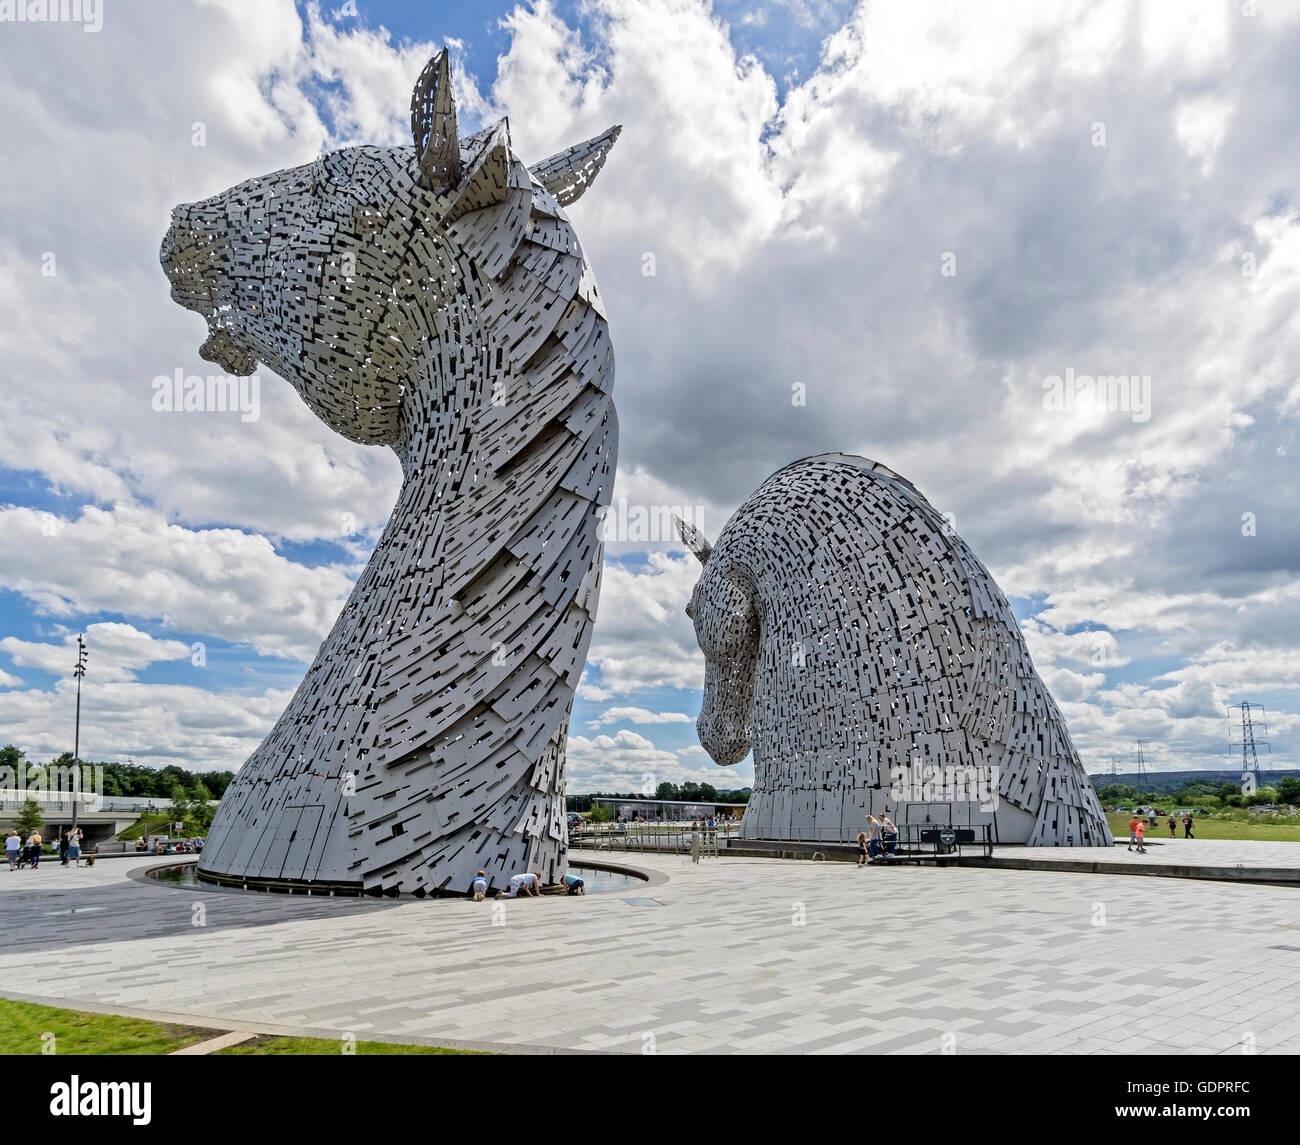 The new Visitor Centre and café at The Helix between The Kelpies in Falkirk Scotland Stock Photo